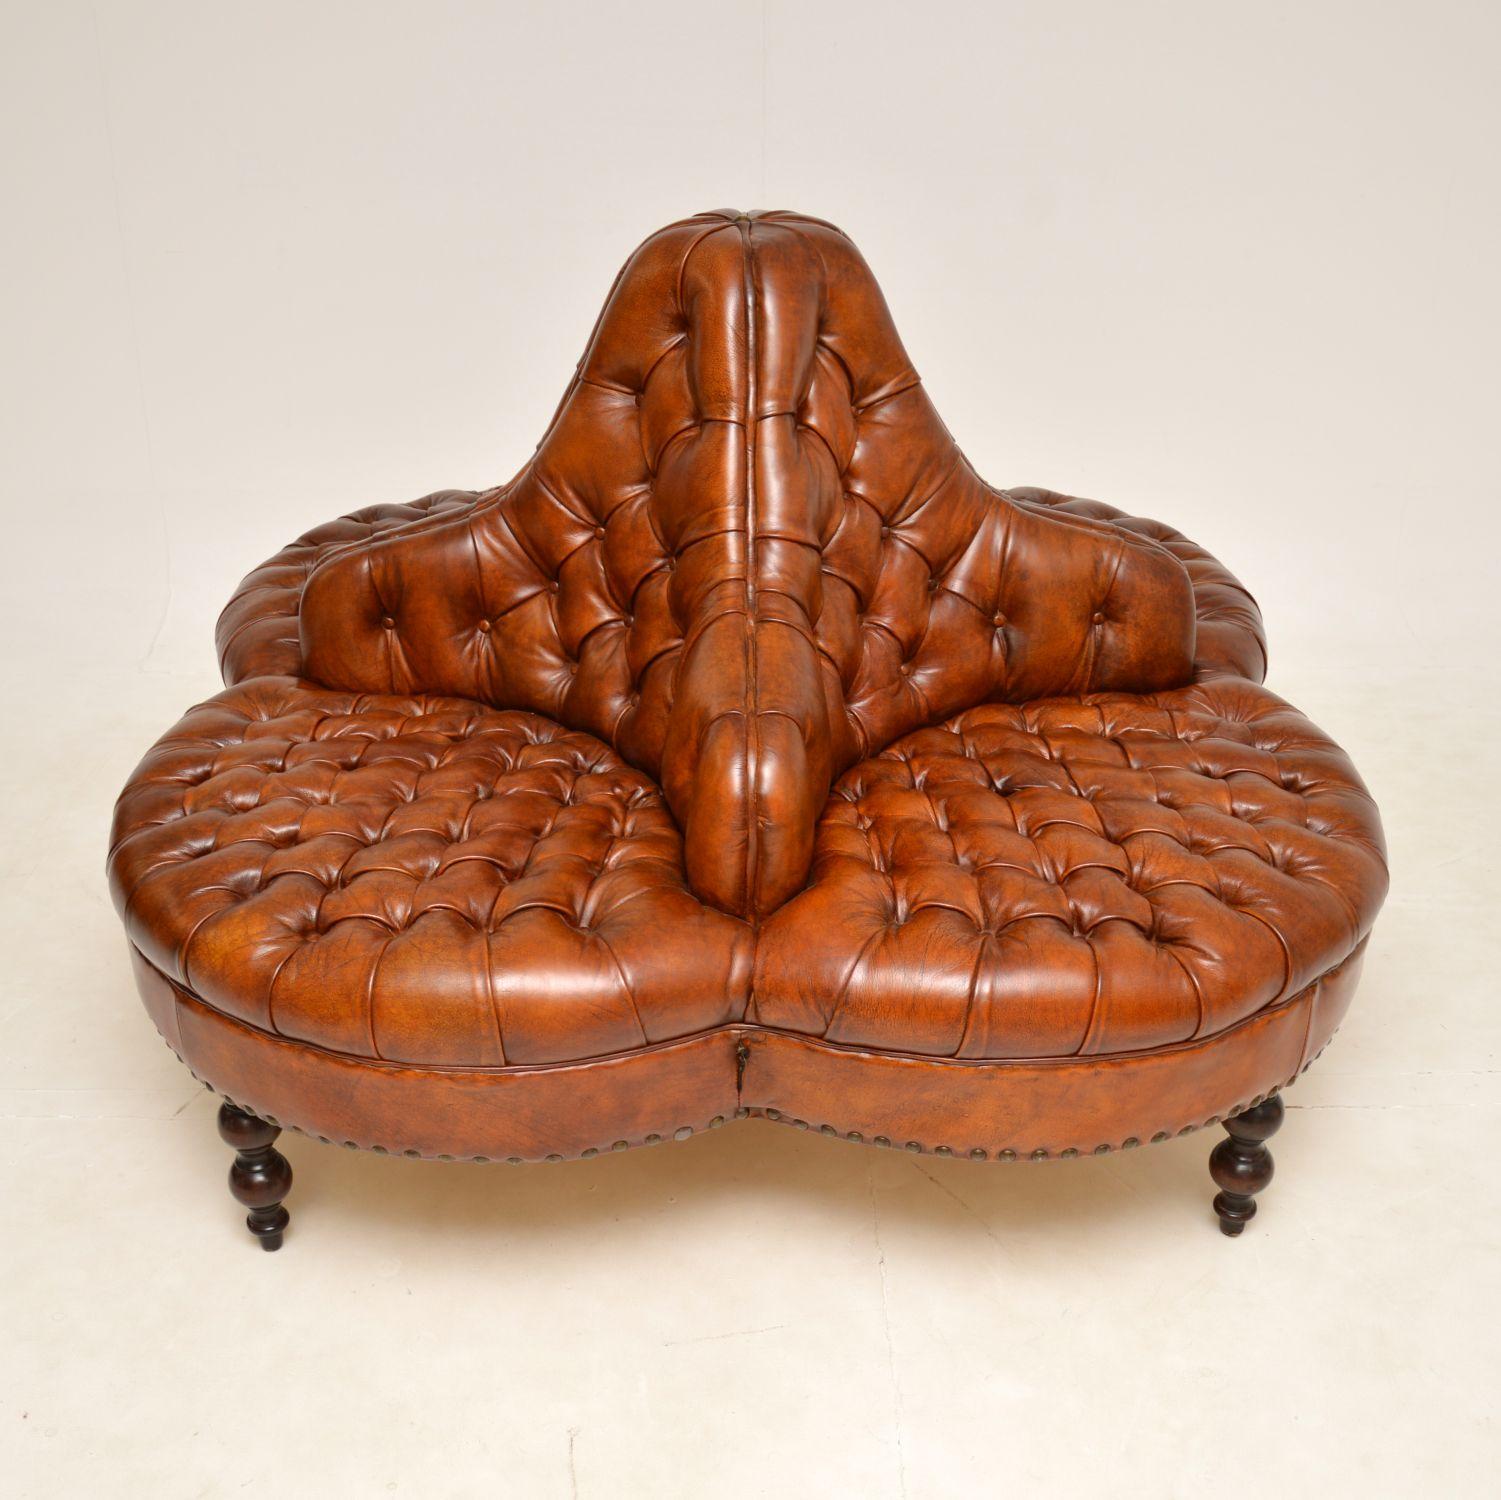 A very large and extremely impressive antique leather four seater conversation sofa in the Victorian style. This was made in England, it dates from around the 1960s.

This would be perfect for a large entry way, library or lounge.

The quality